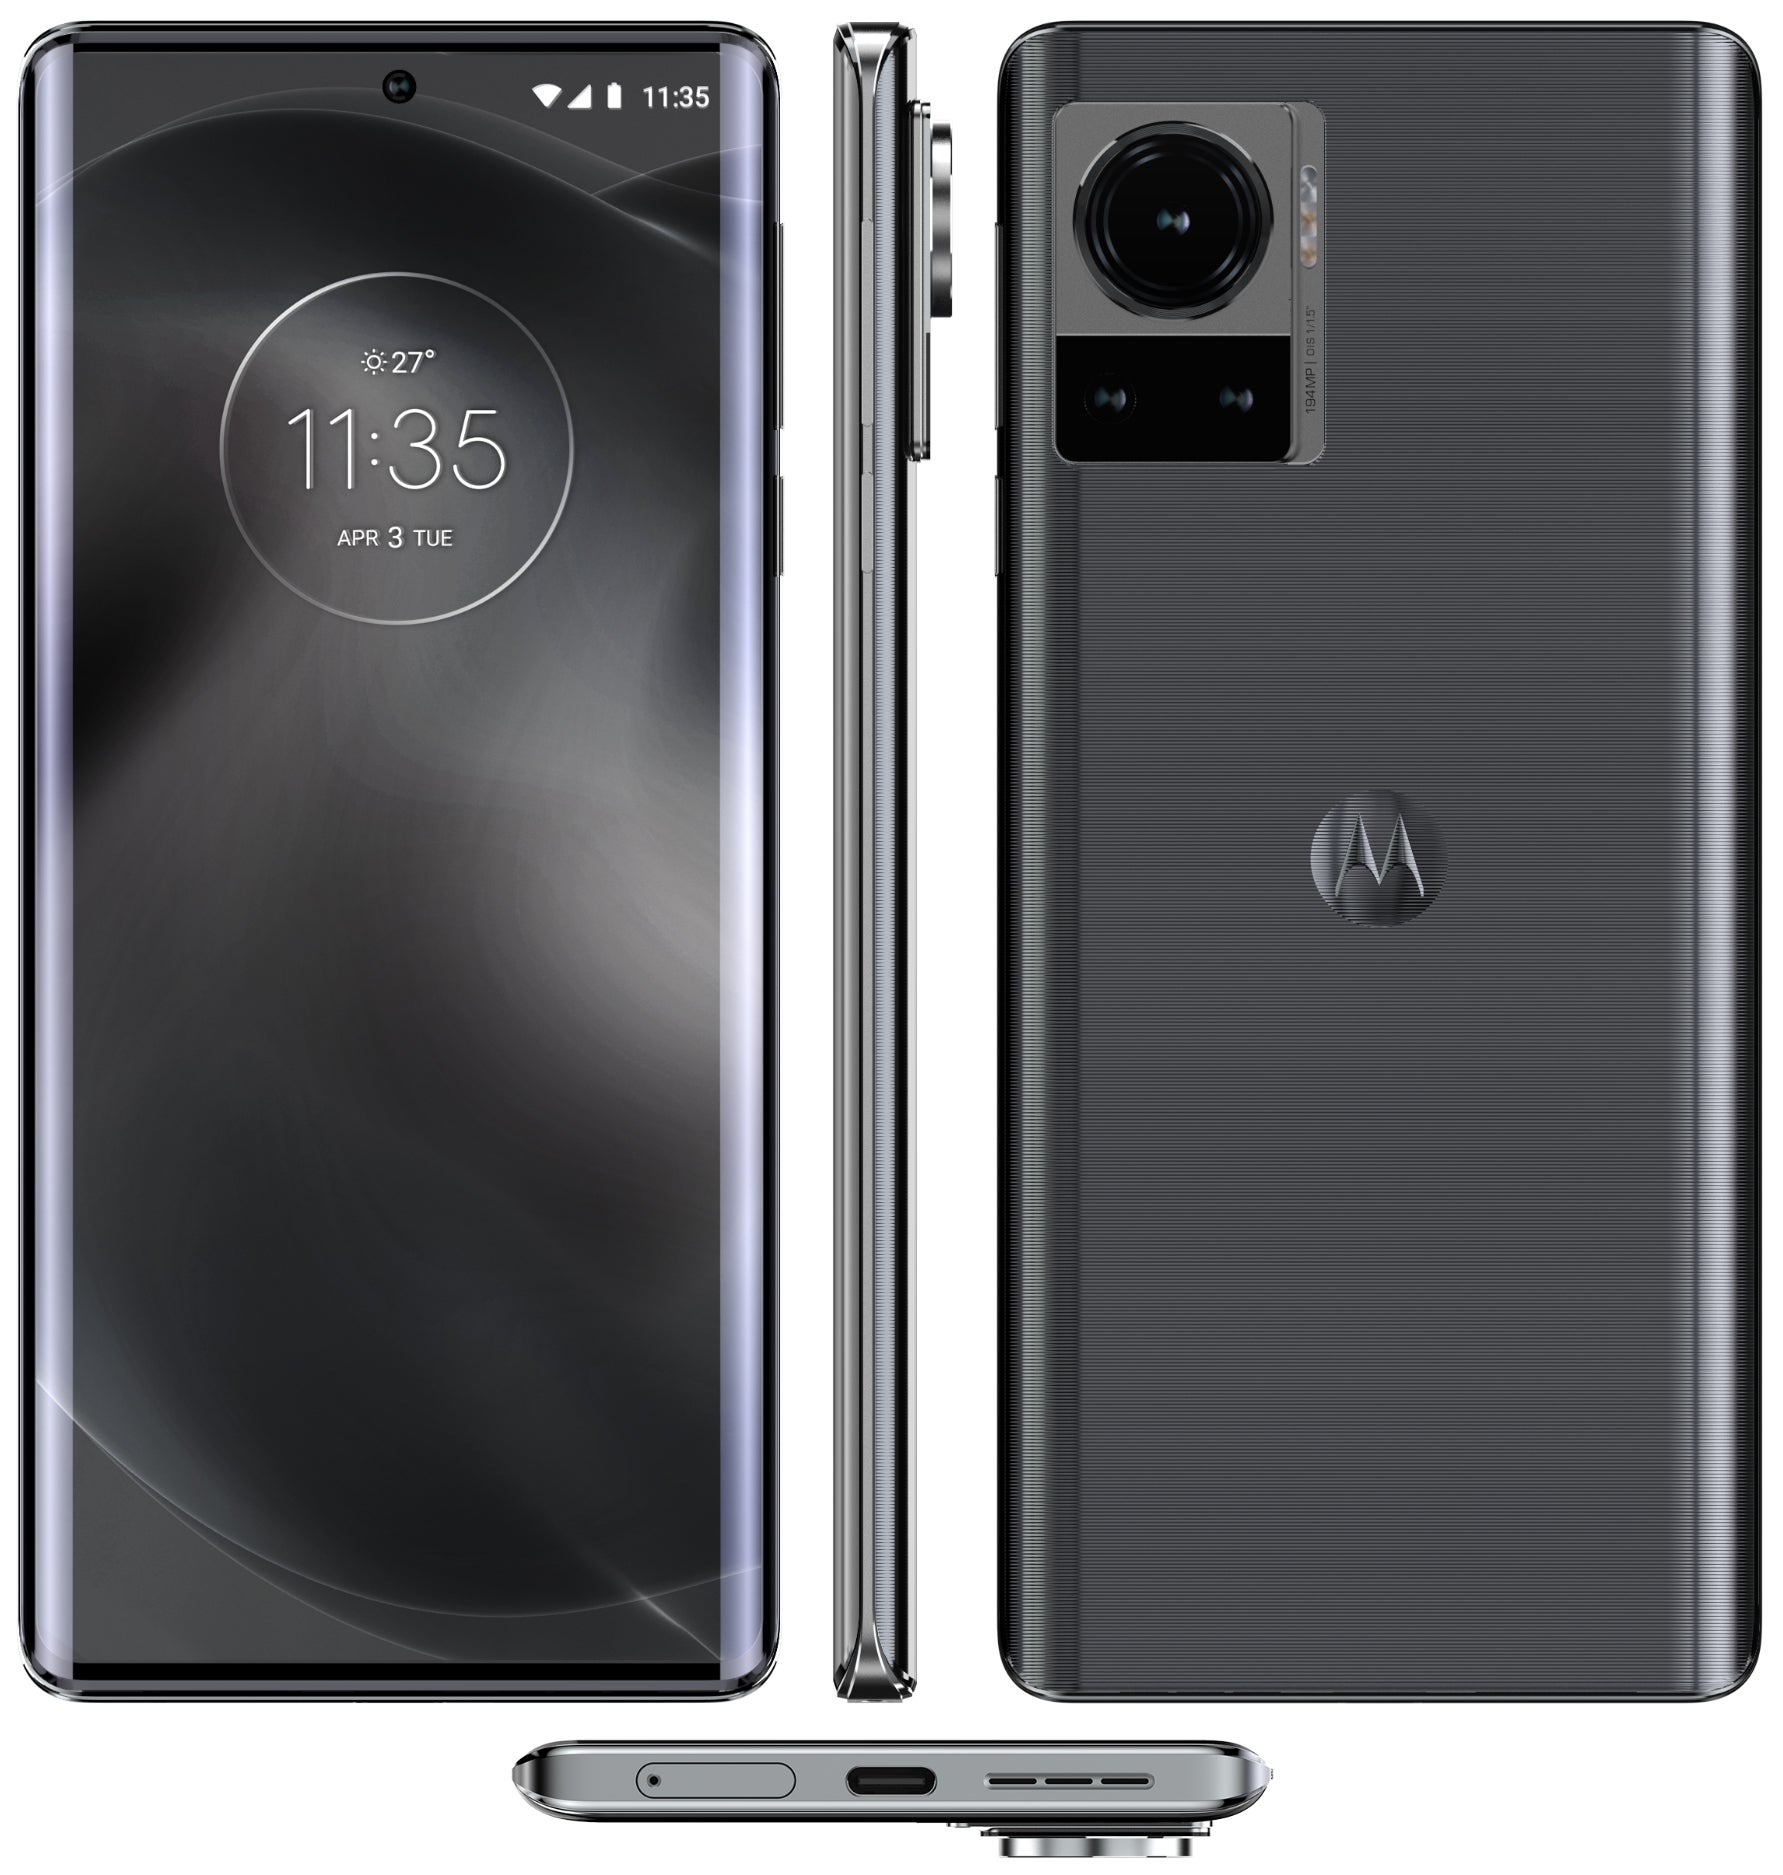 Motorola Frontier - Motorola Frontier leaked render offers a better look at the upcoming flagship